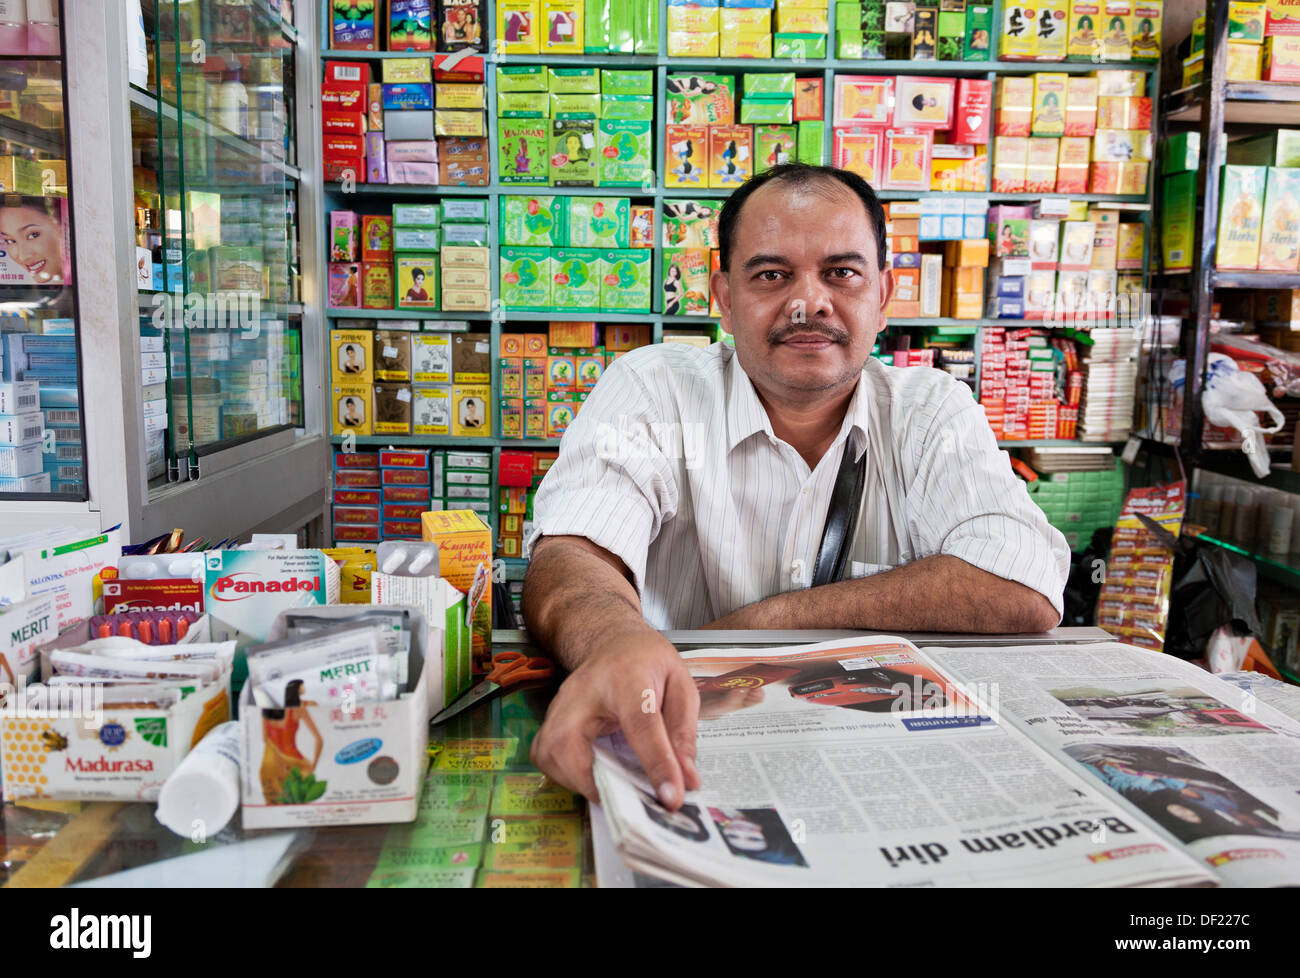 Man with newspaper selling herbs and pharmacy products at Chow Kit Market, Kuala Lumpur Malaysia. Stock Photo